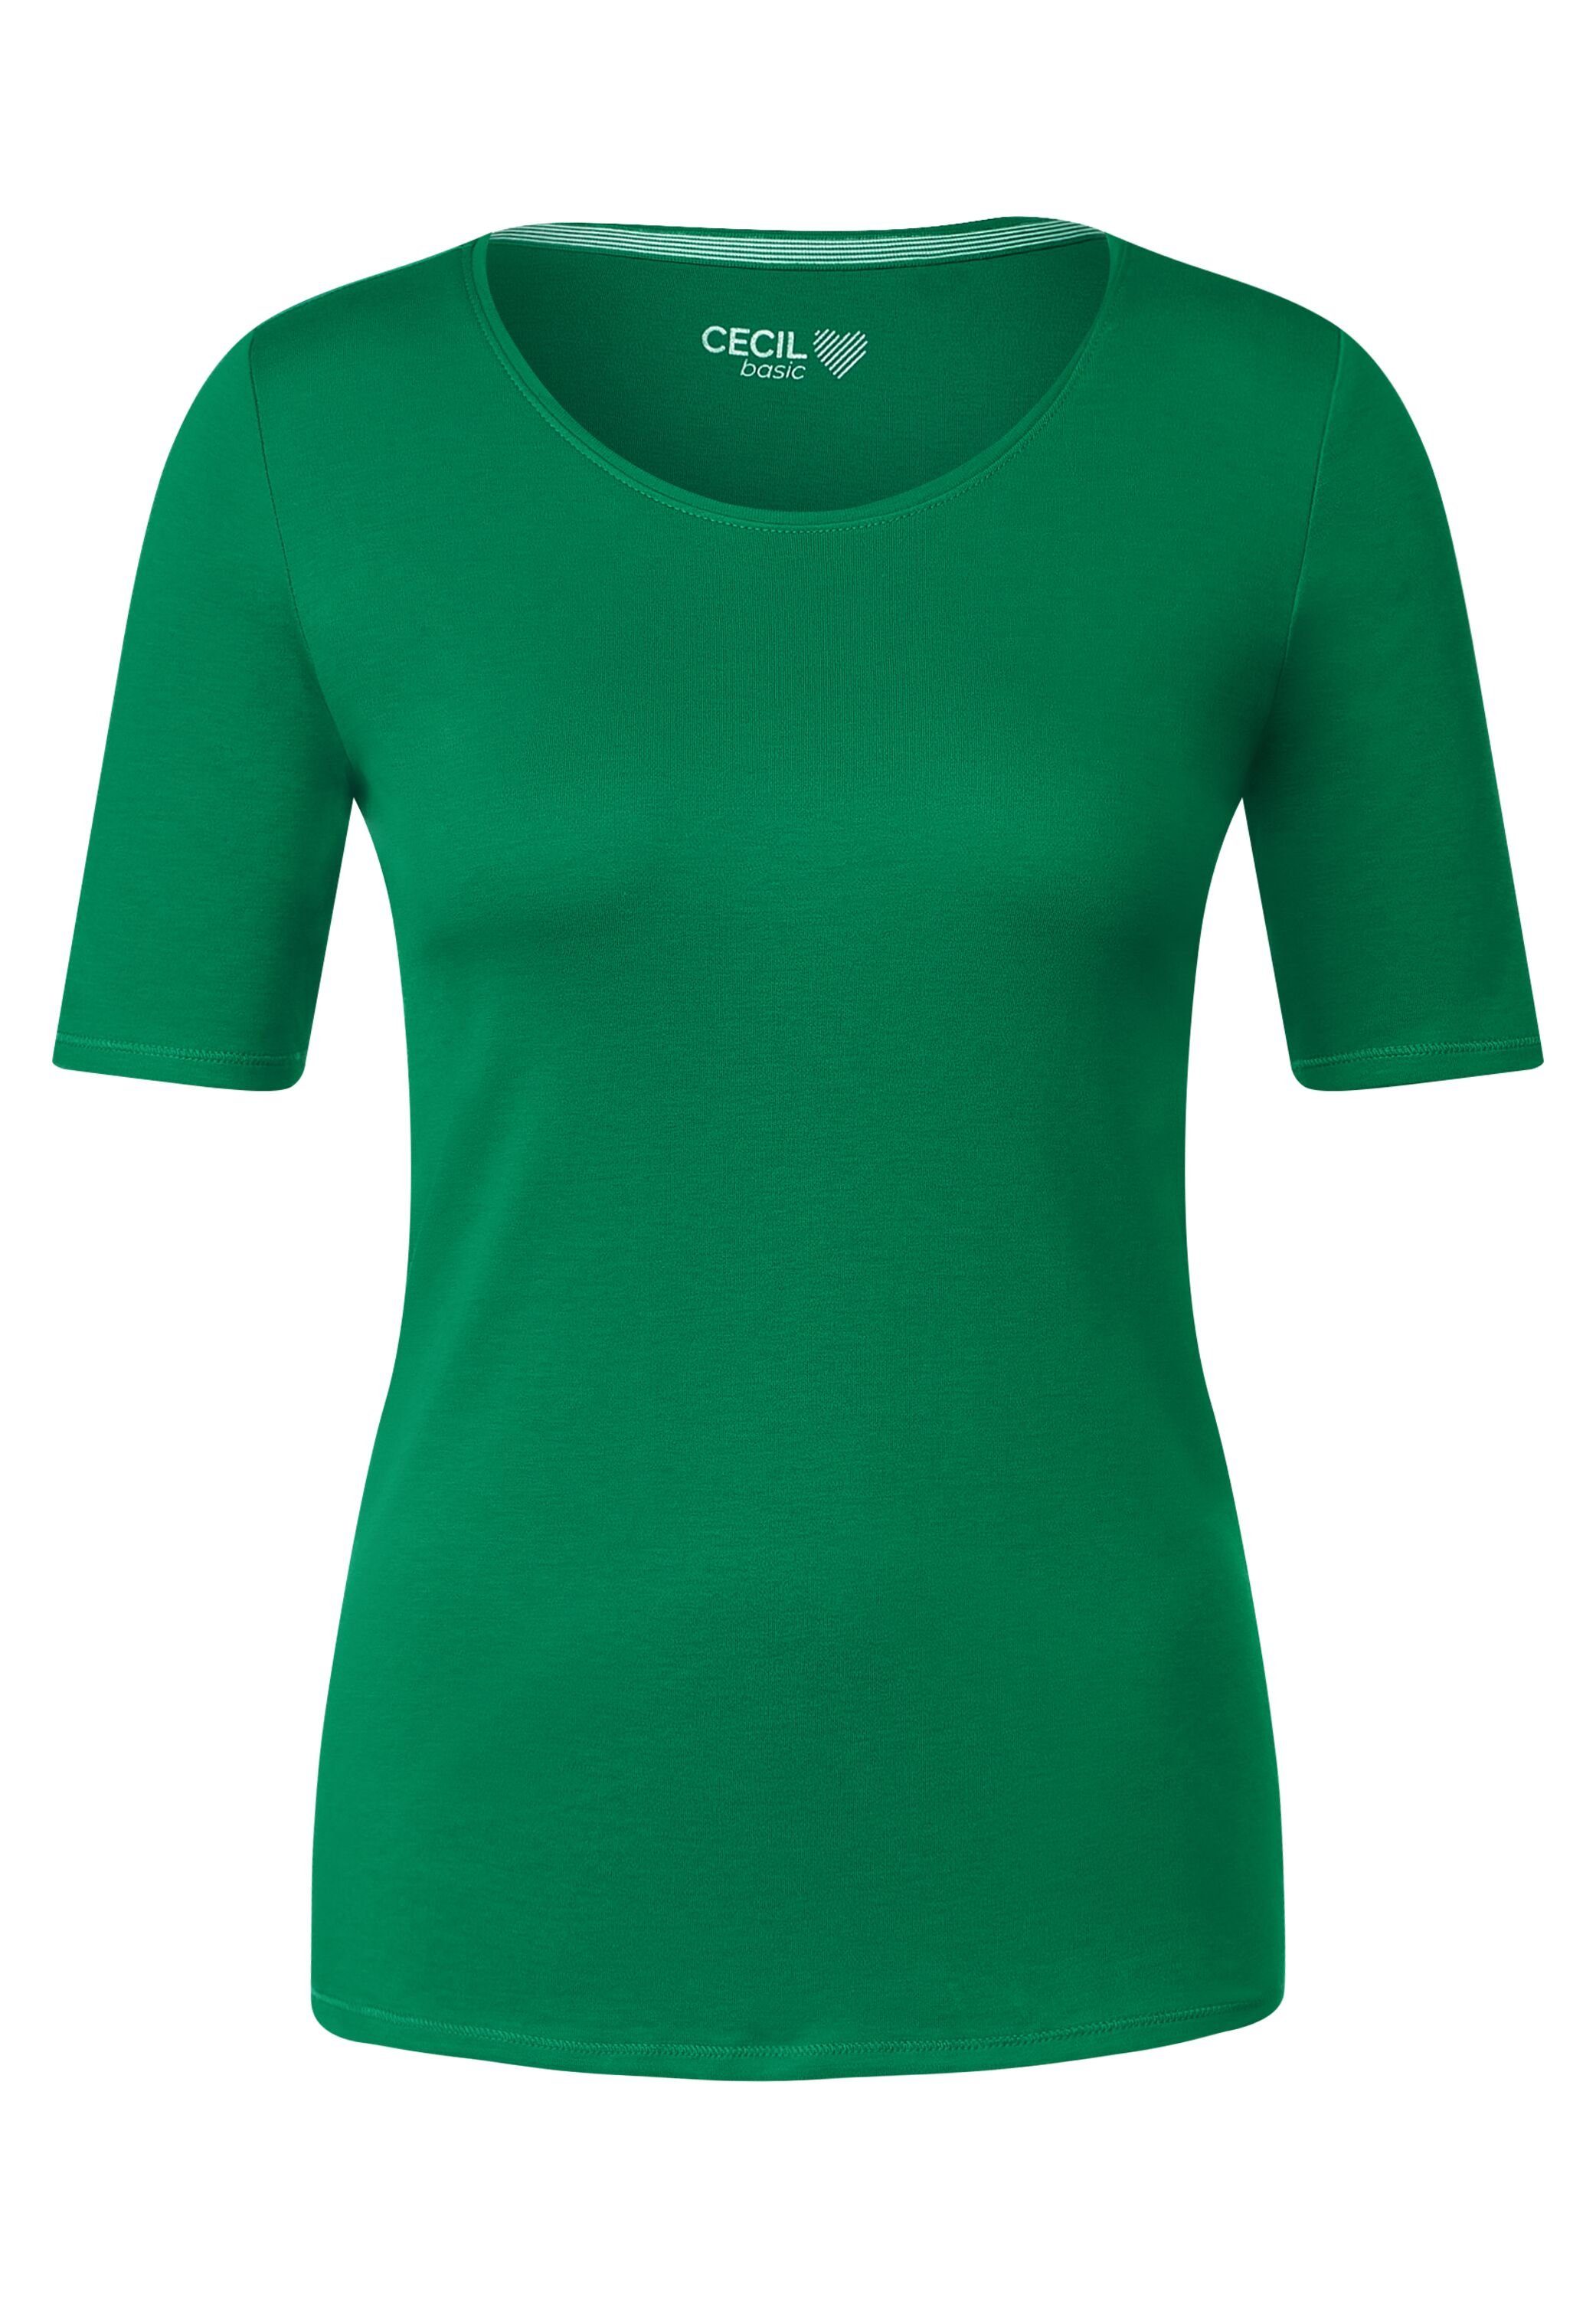 Cecil T-Shirt in Unifarbe easy green